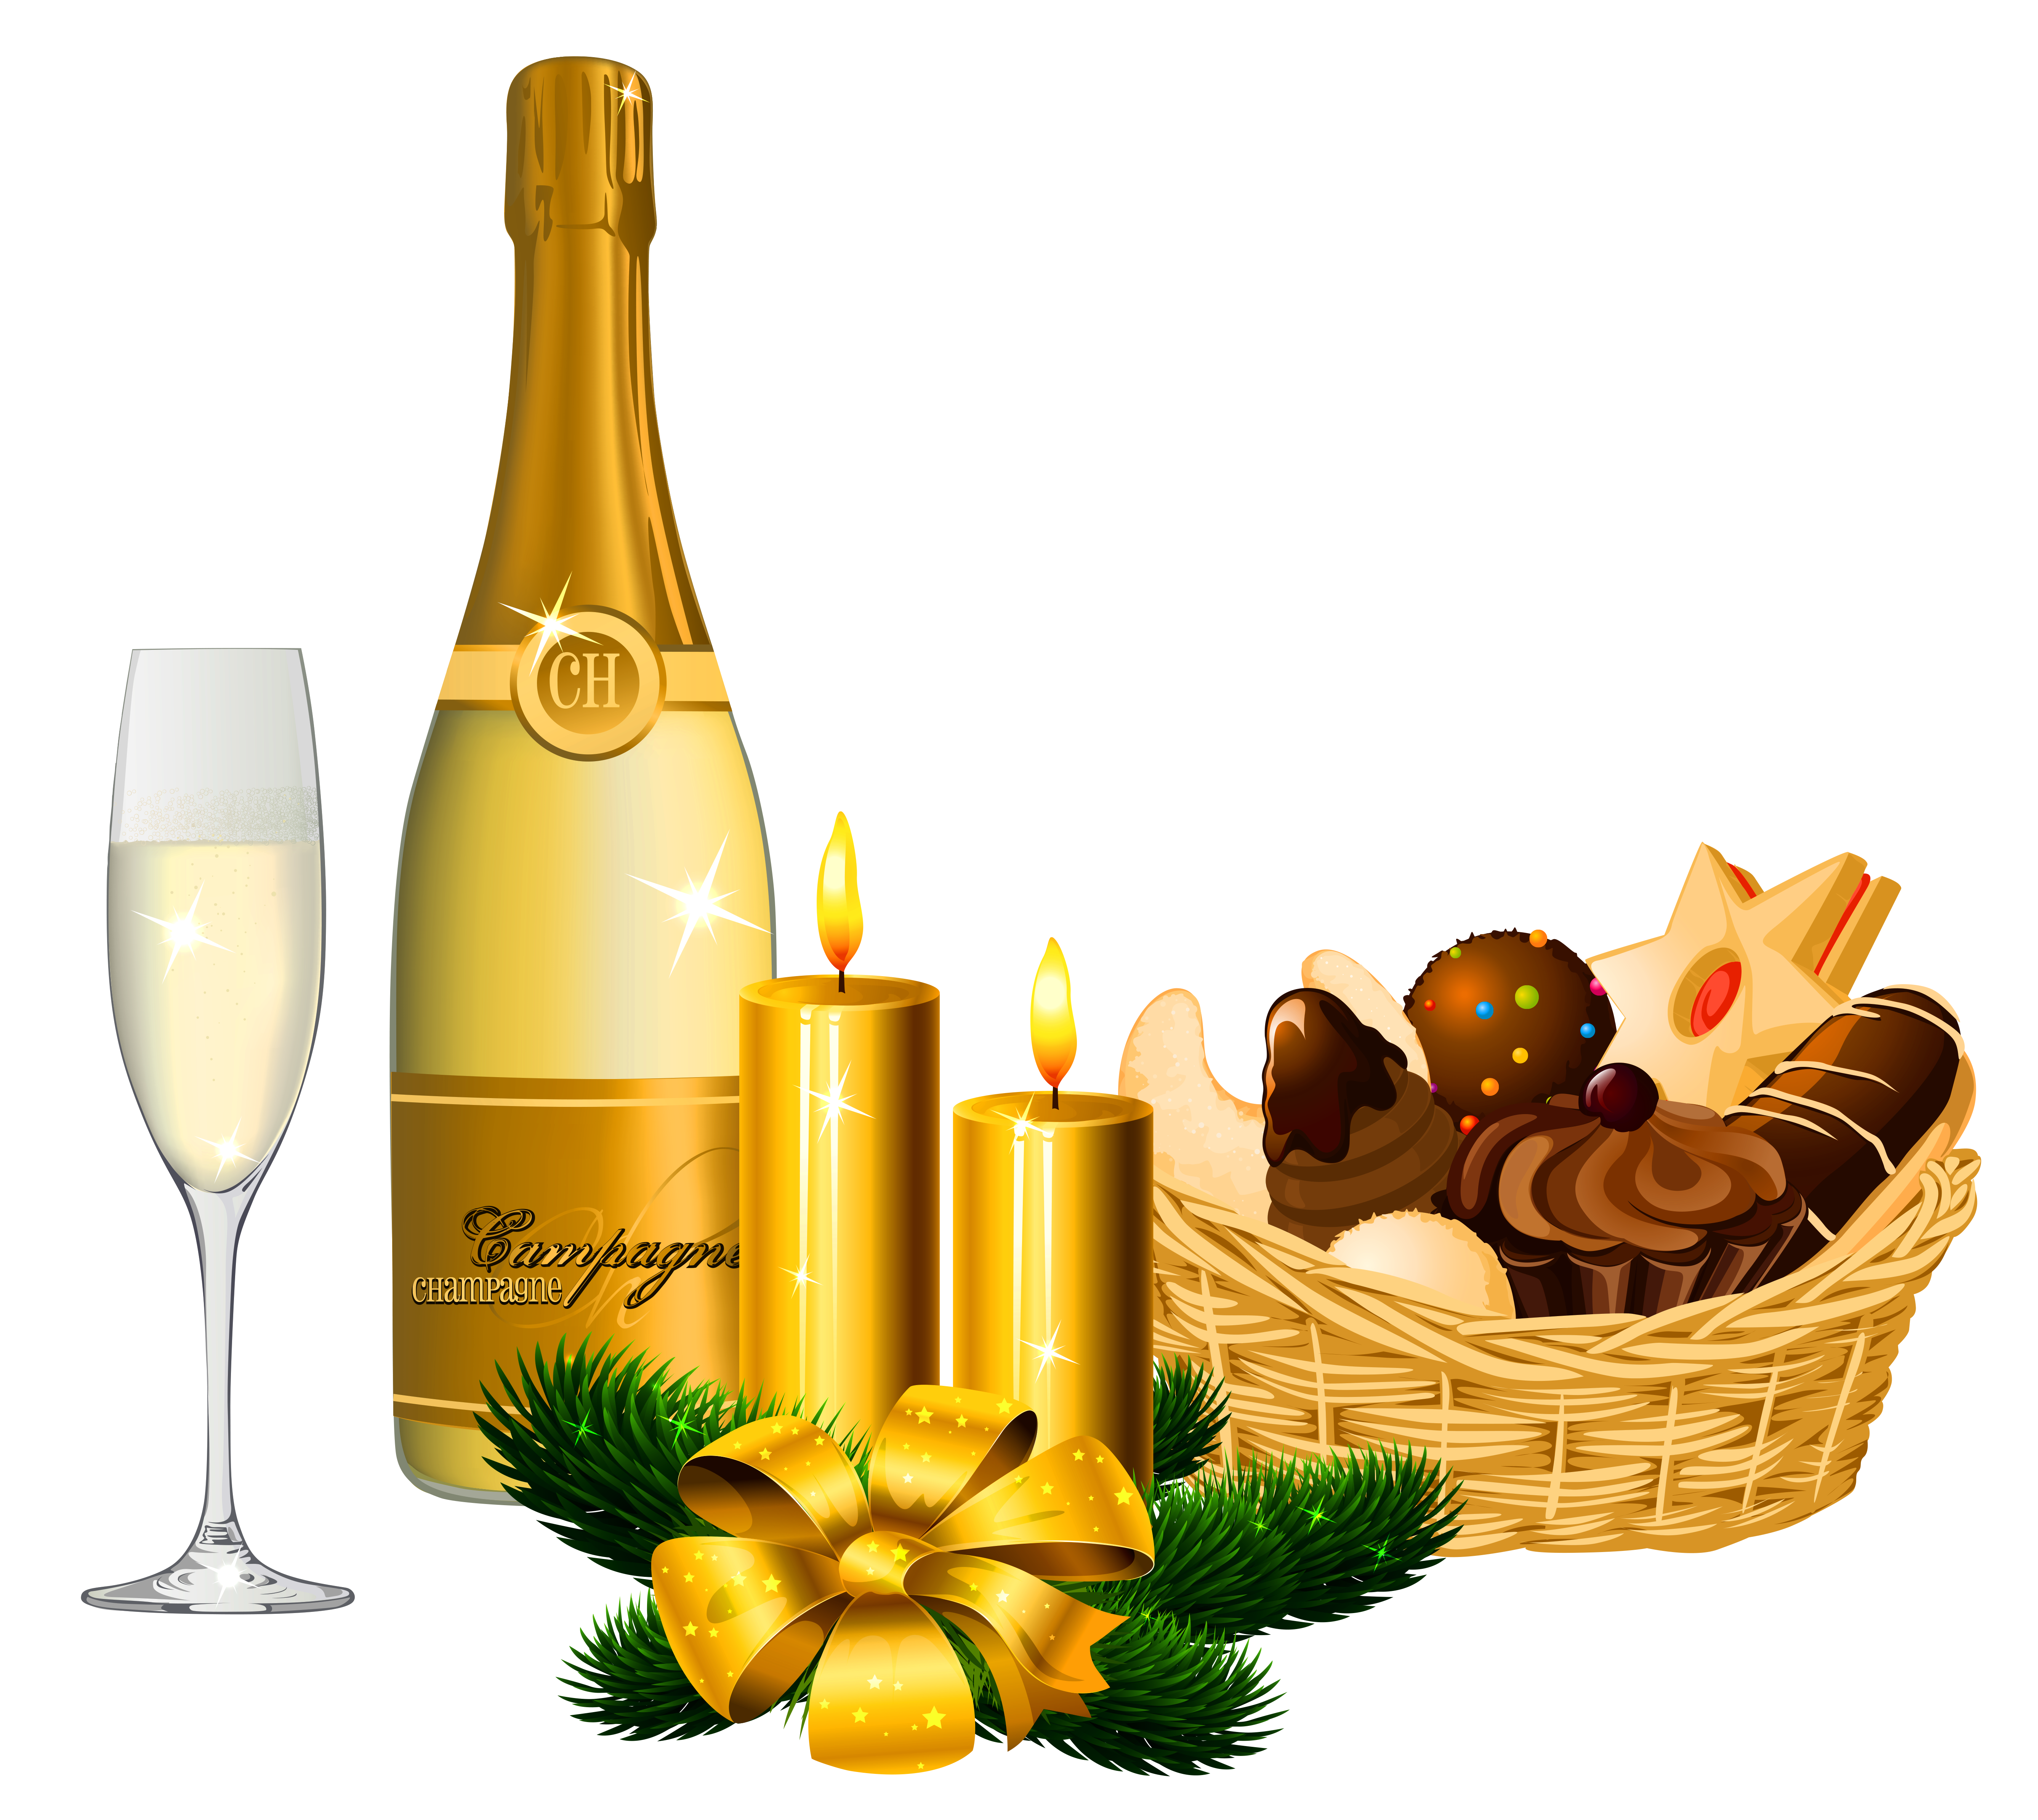 New year delicacies and. Gold clipart champagne glass